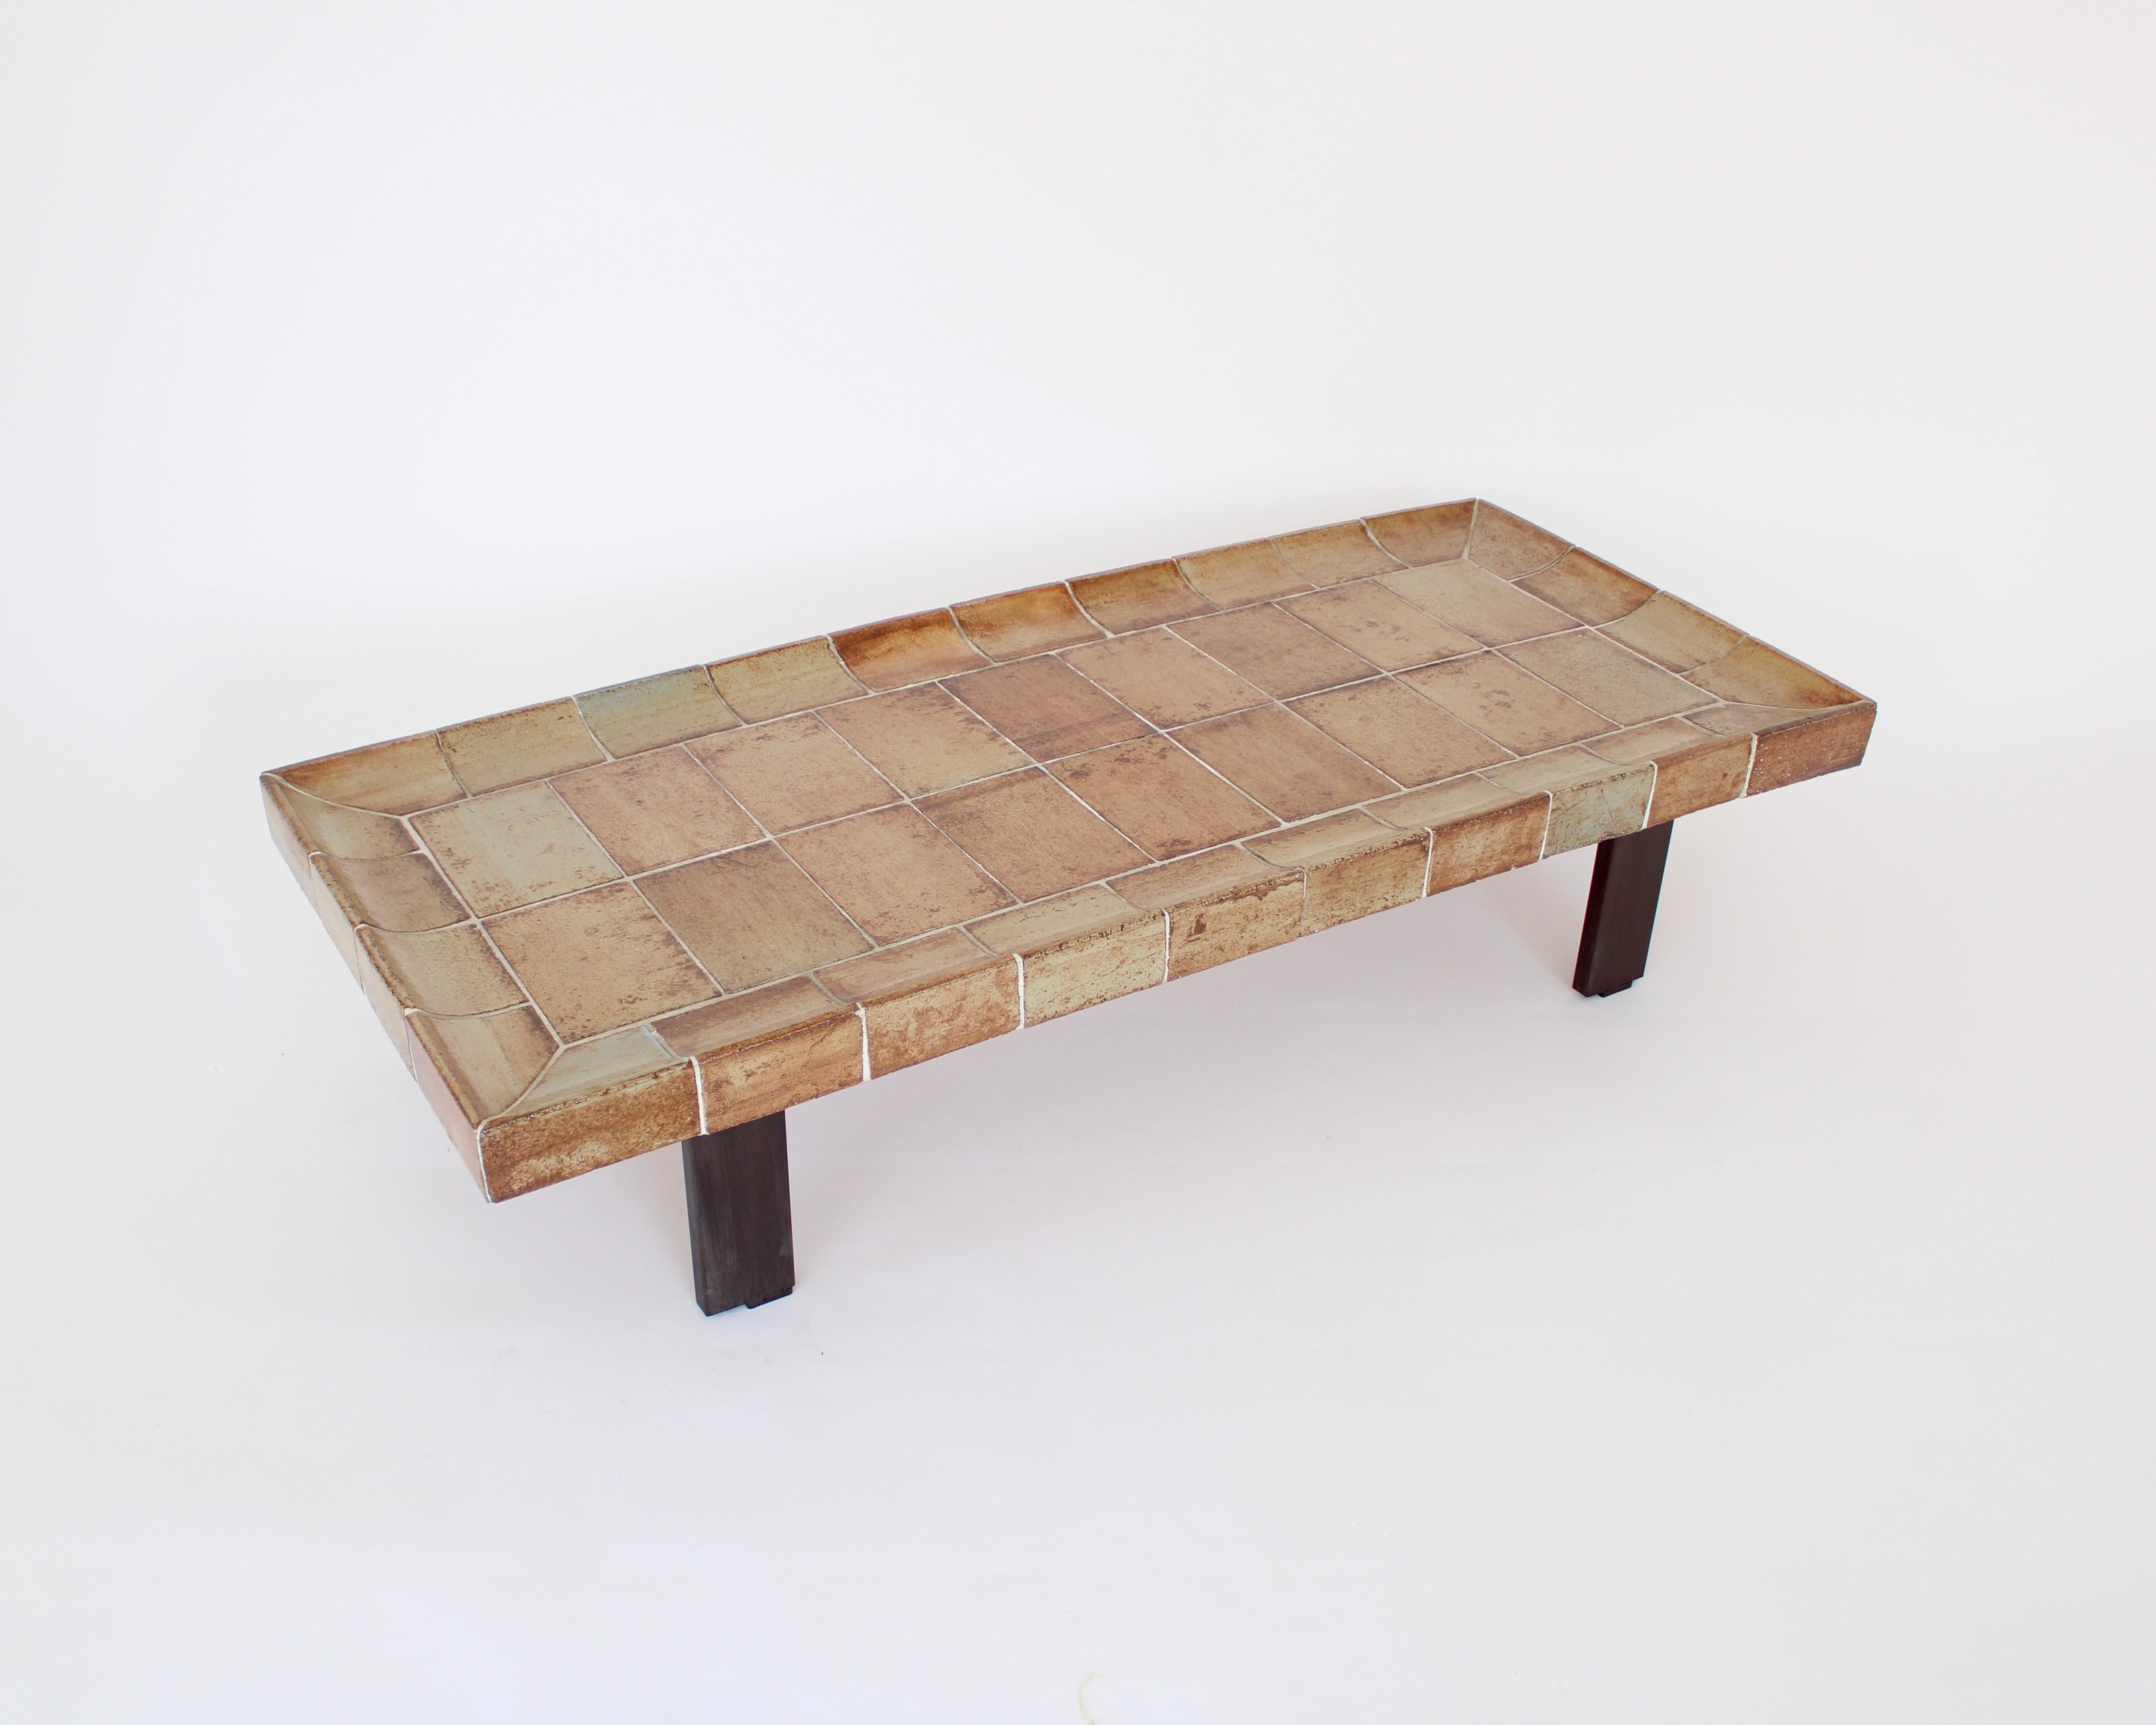 Roger Capron French ceramic tile coffee table model Cuvette. This table is composed of tiles that each exhibit the strong influence of the fire in the kiln and vary in colors of warm caramel, pale brown, beige, tan. The tiles have a central motif